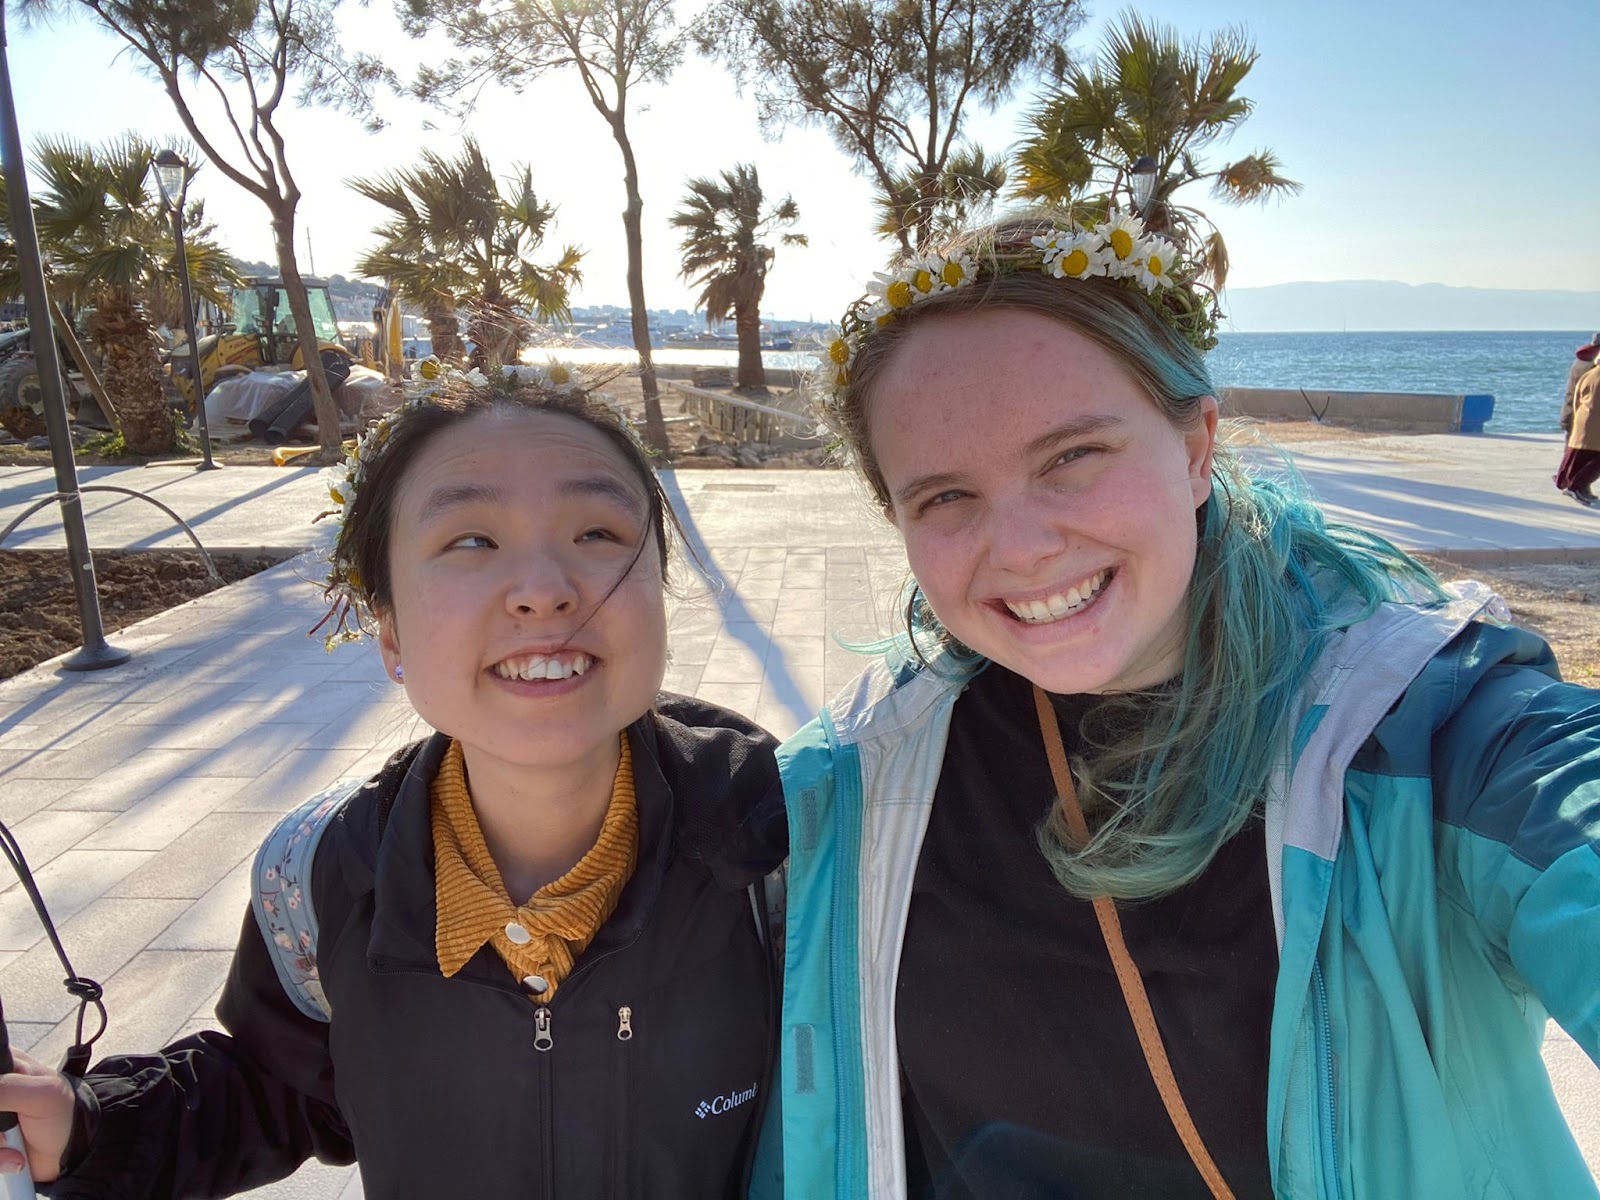 Miso and friend wearing flower crowns